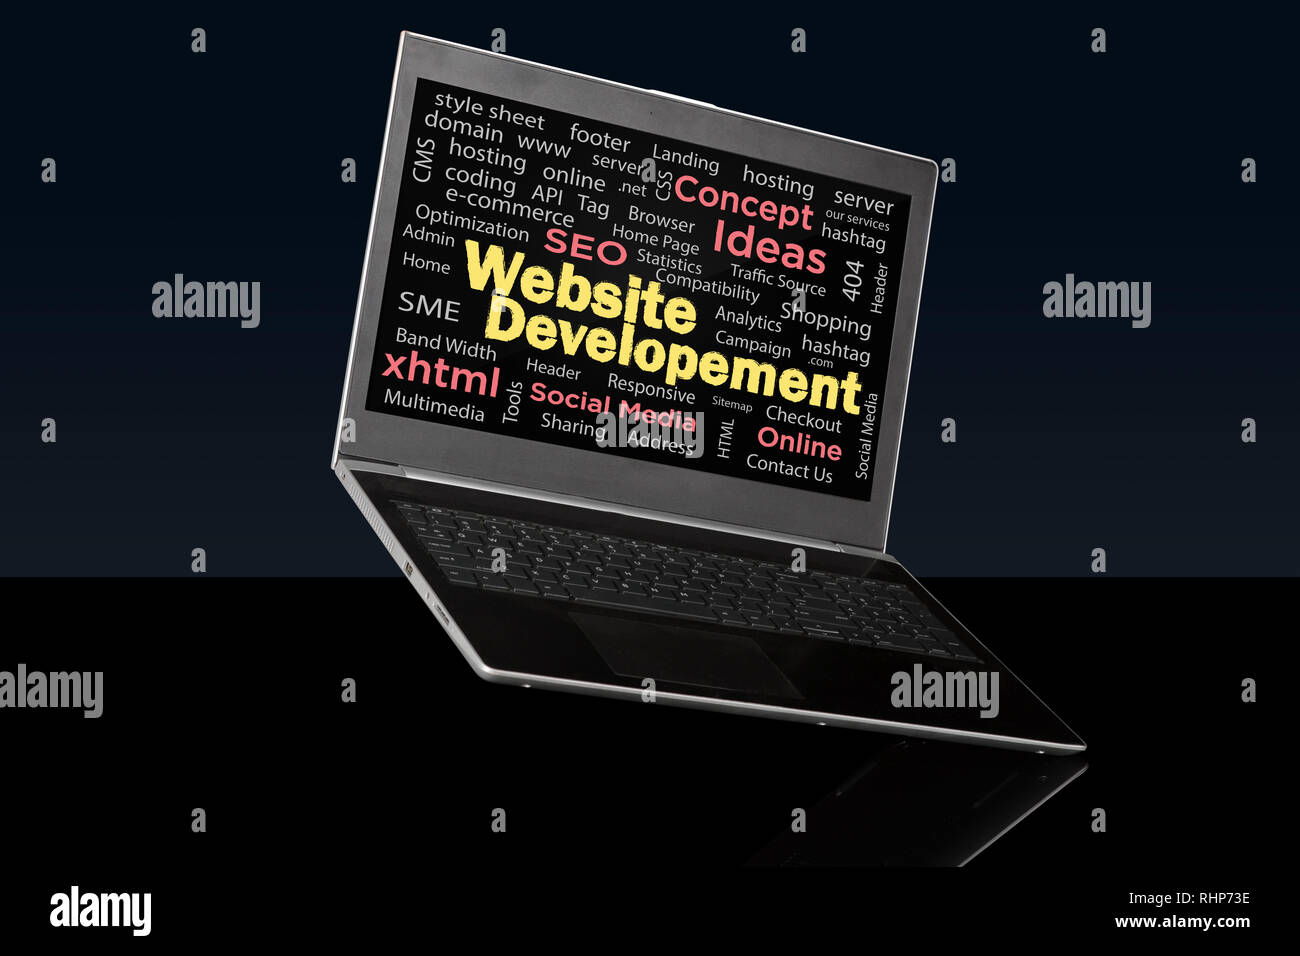 Website Development words collage side view on laptop screen. Stock Photo